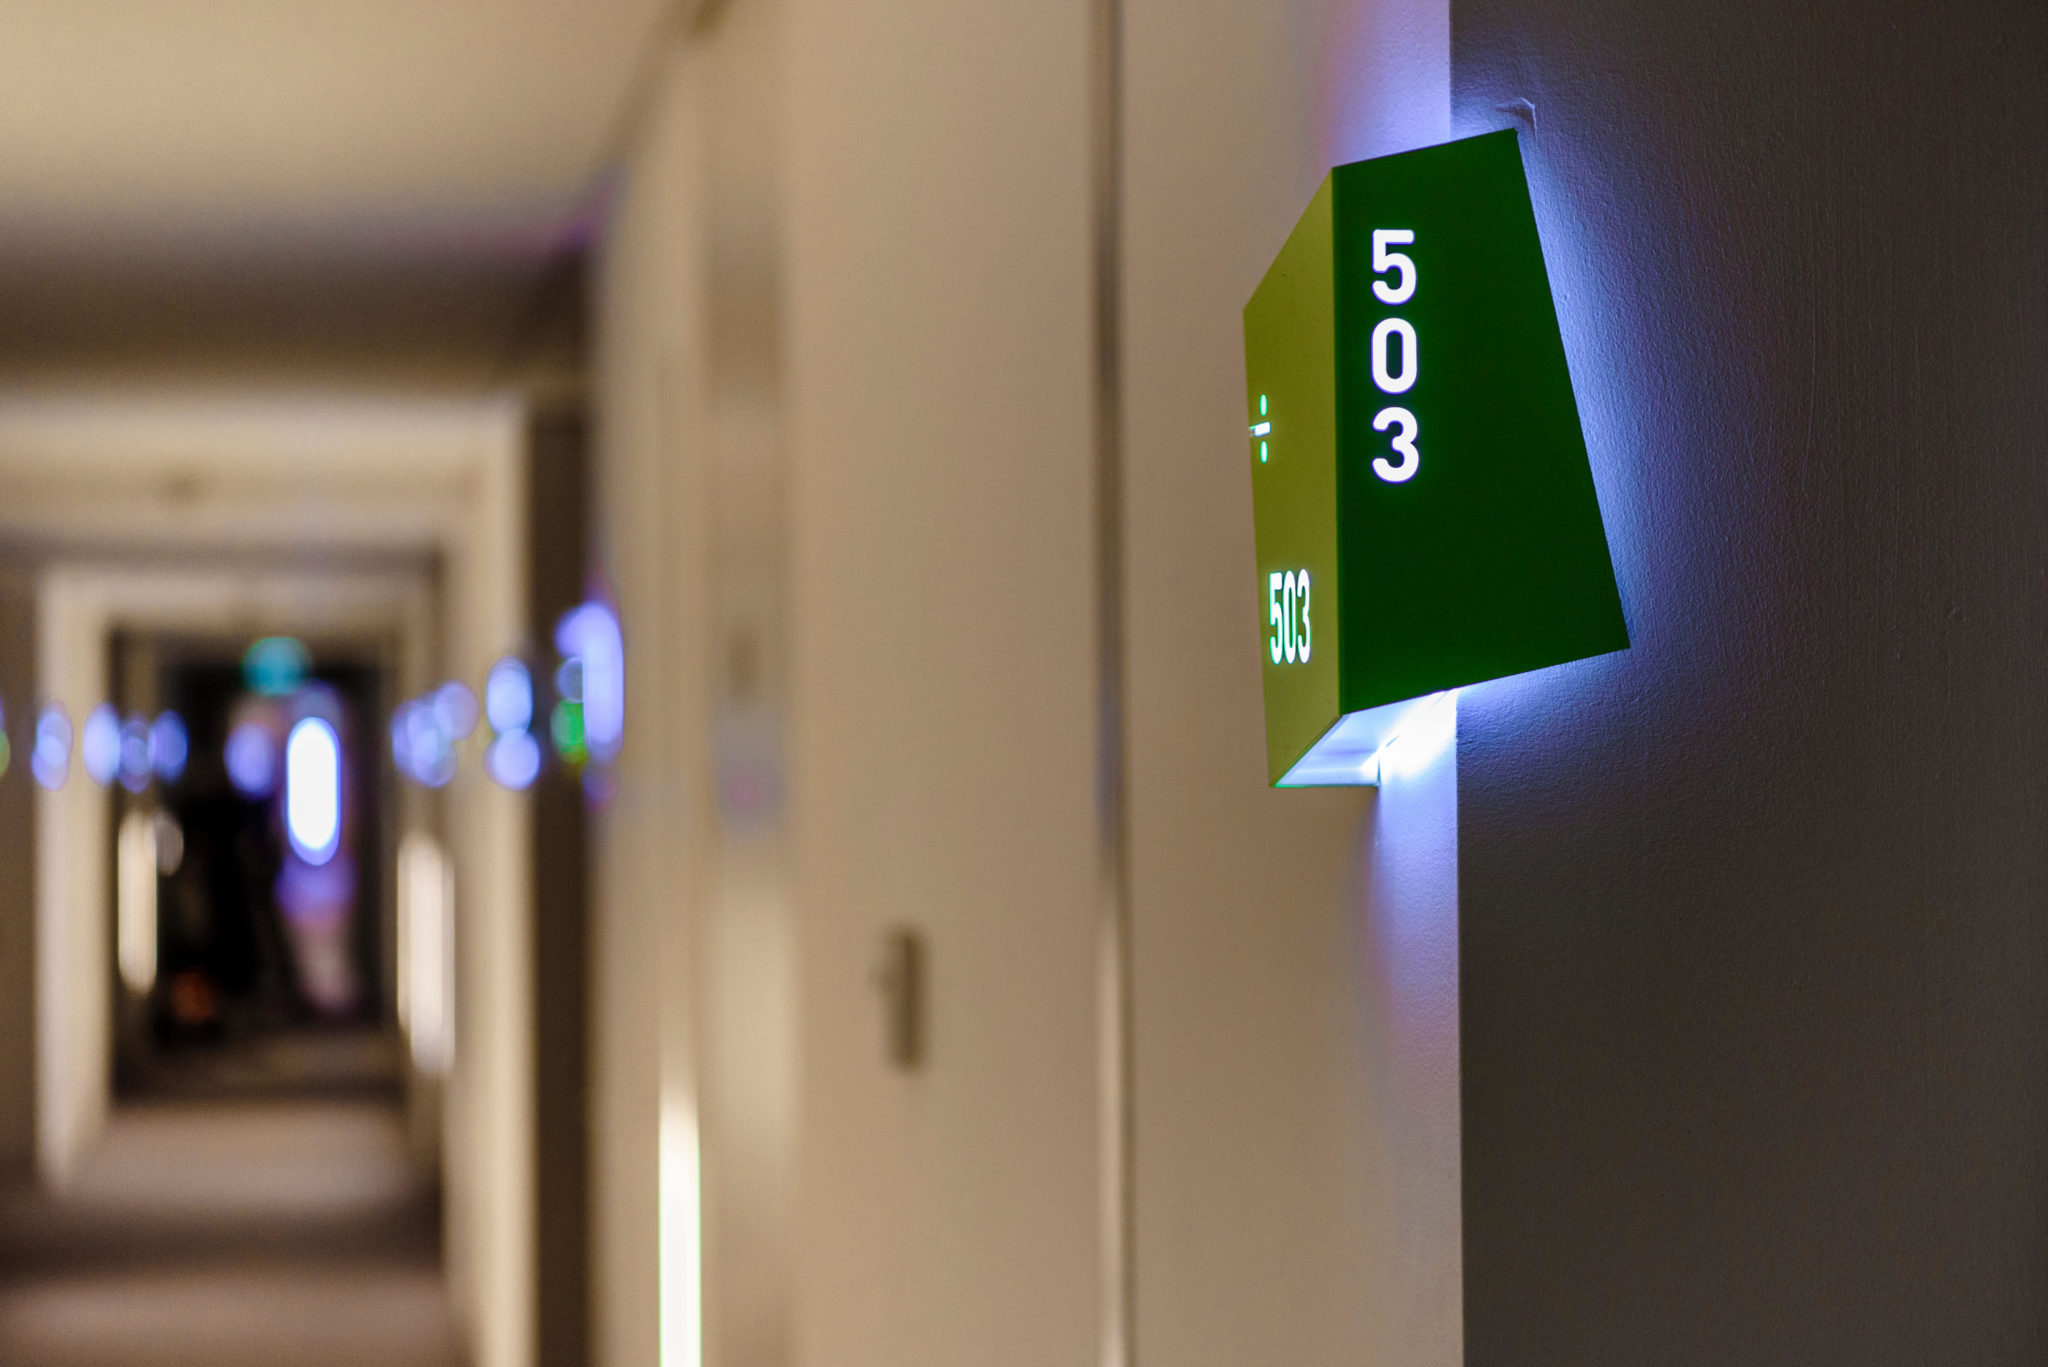 Room lights are seen outside rooms along a corridor in a hotel in 2017.